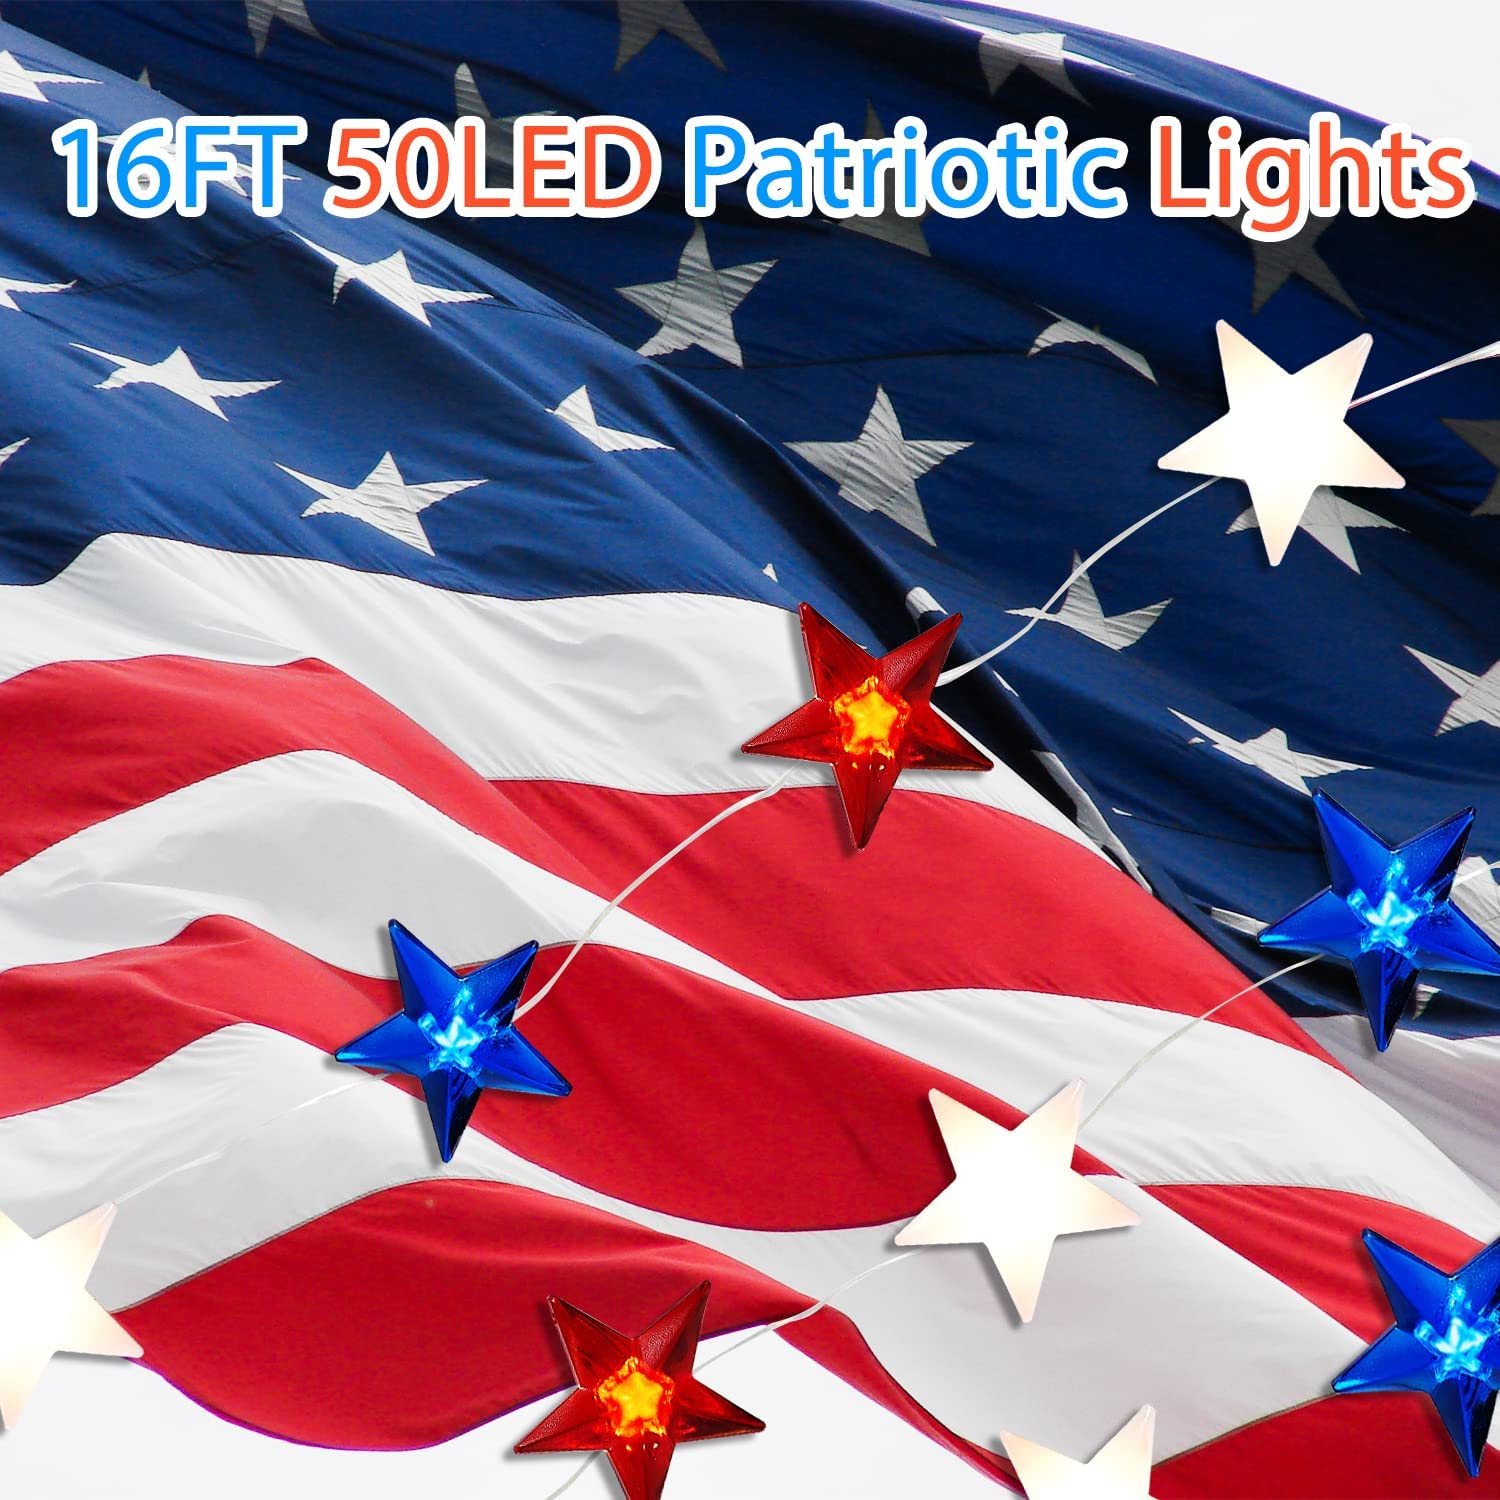 4th of July Decorations Red White and Blue Lights Battery Operated String Lights 16FT 50 LED